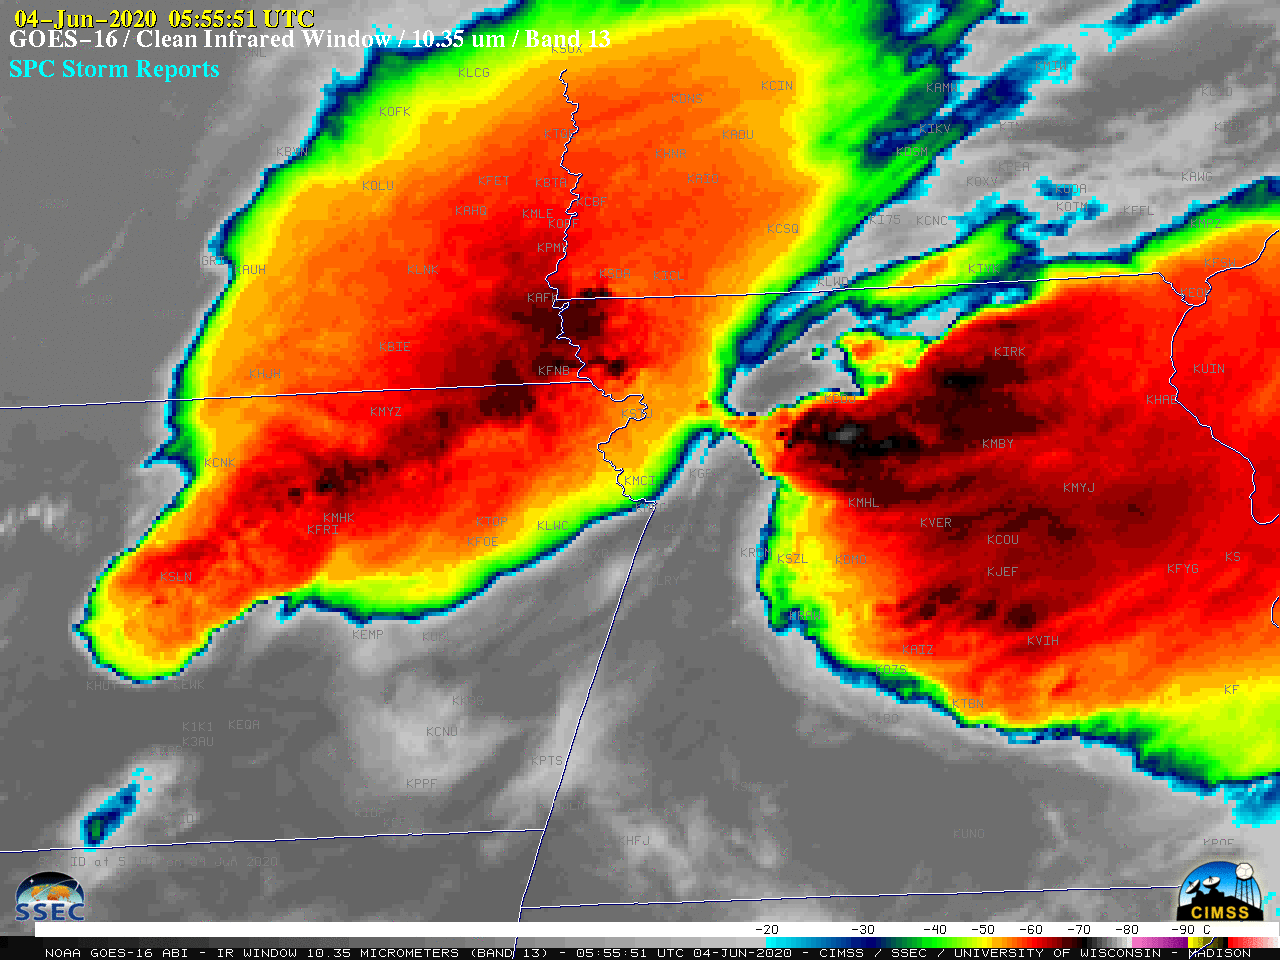 GOES-16 “Clean” Infrared Window (10.35 µm) images, with SPC storm reports plotted in cyan [click to play animation | MP4]